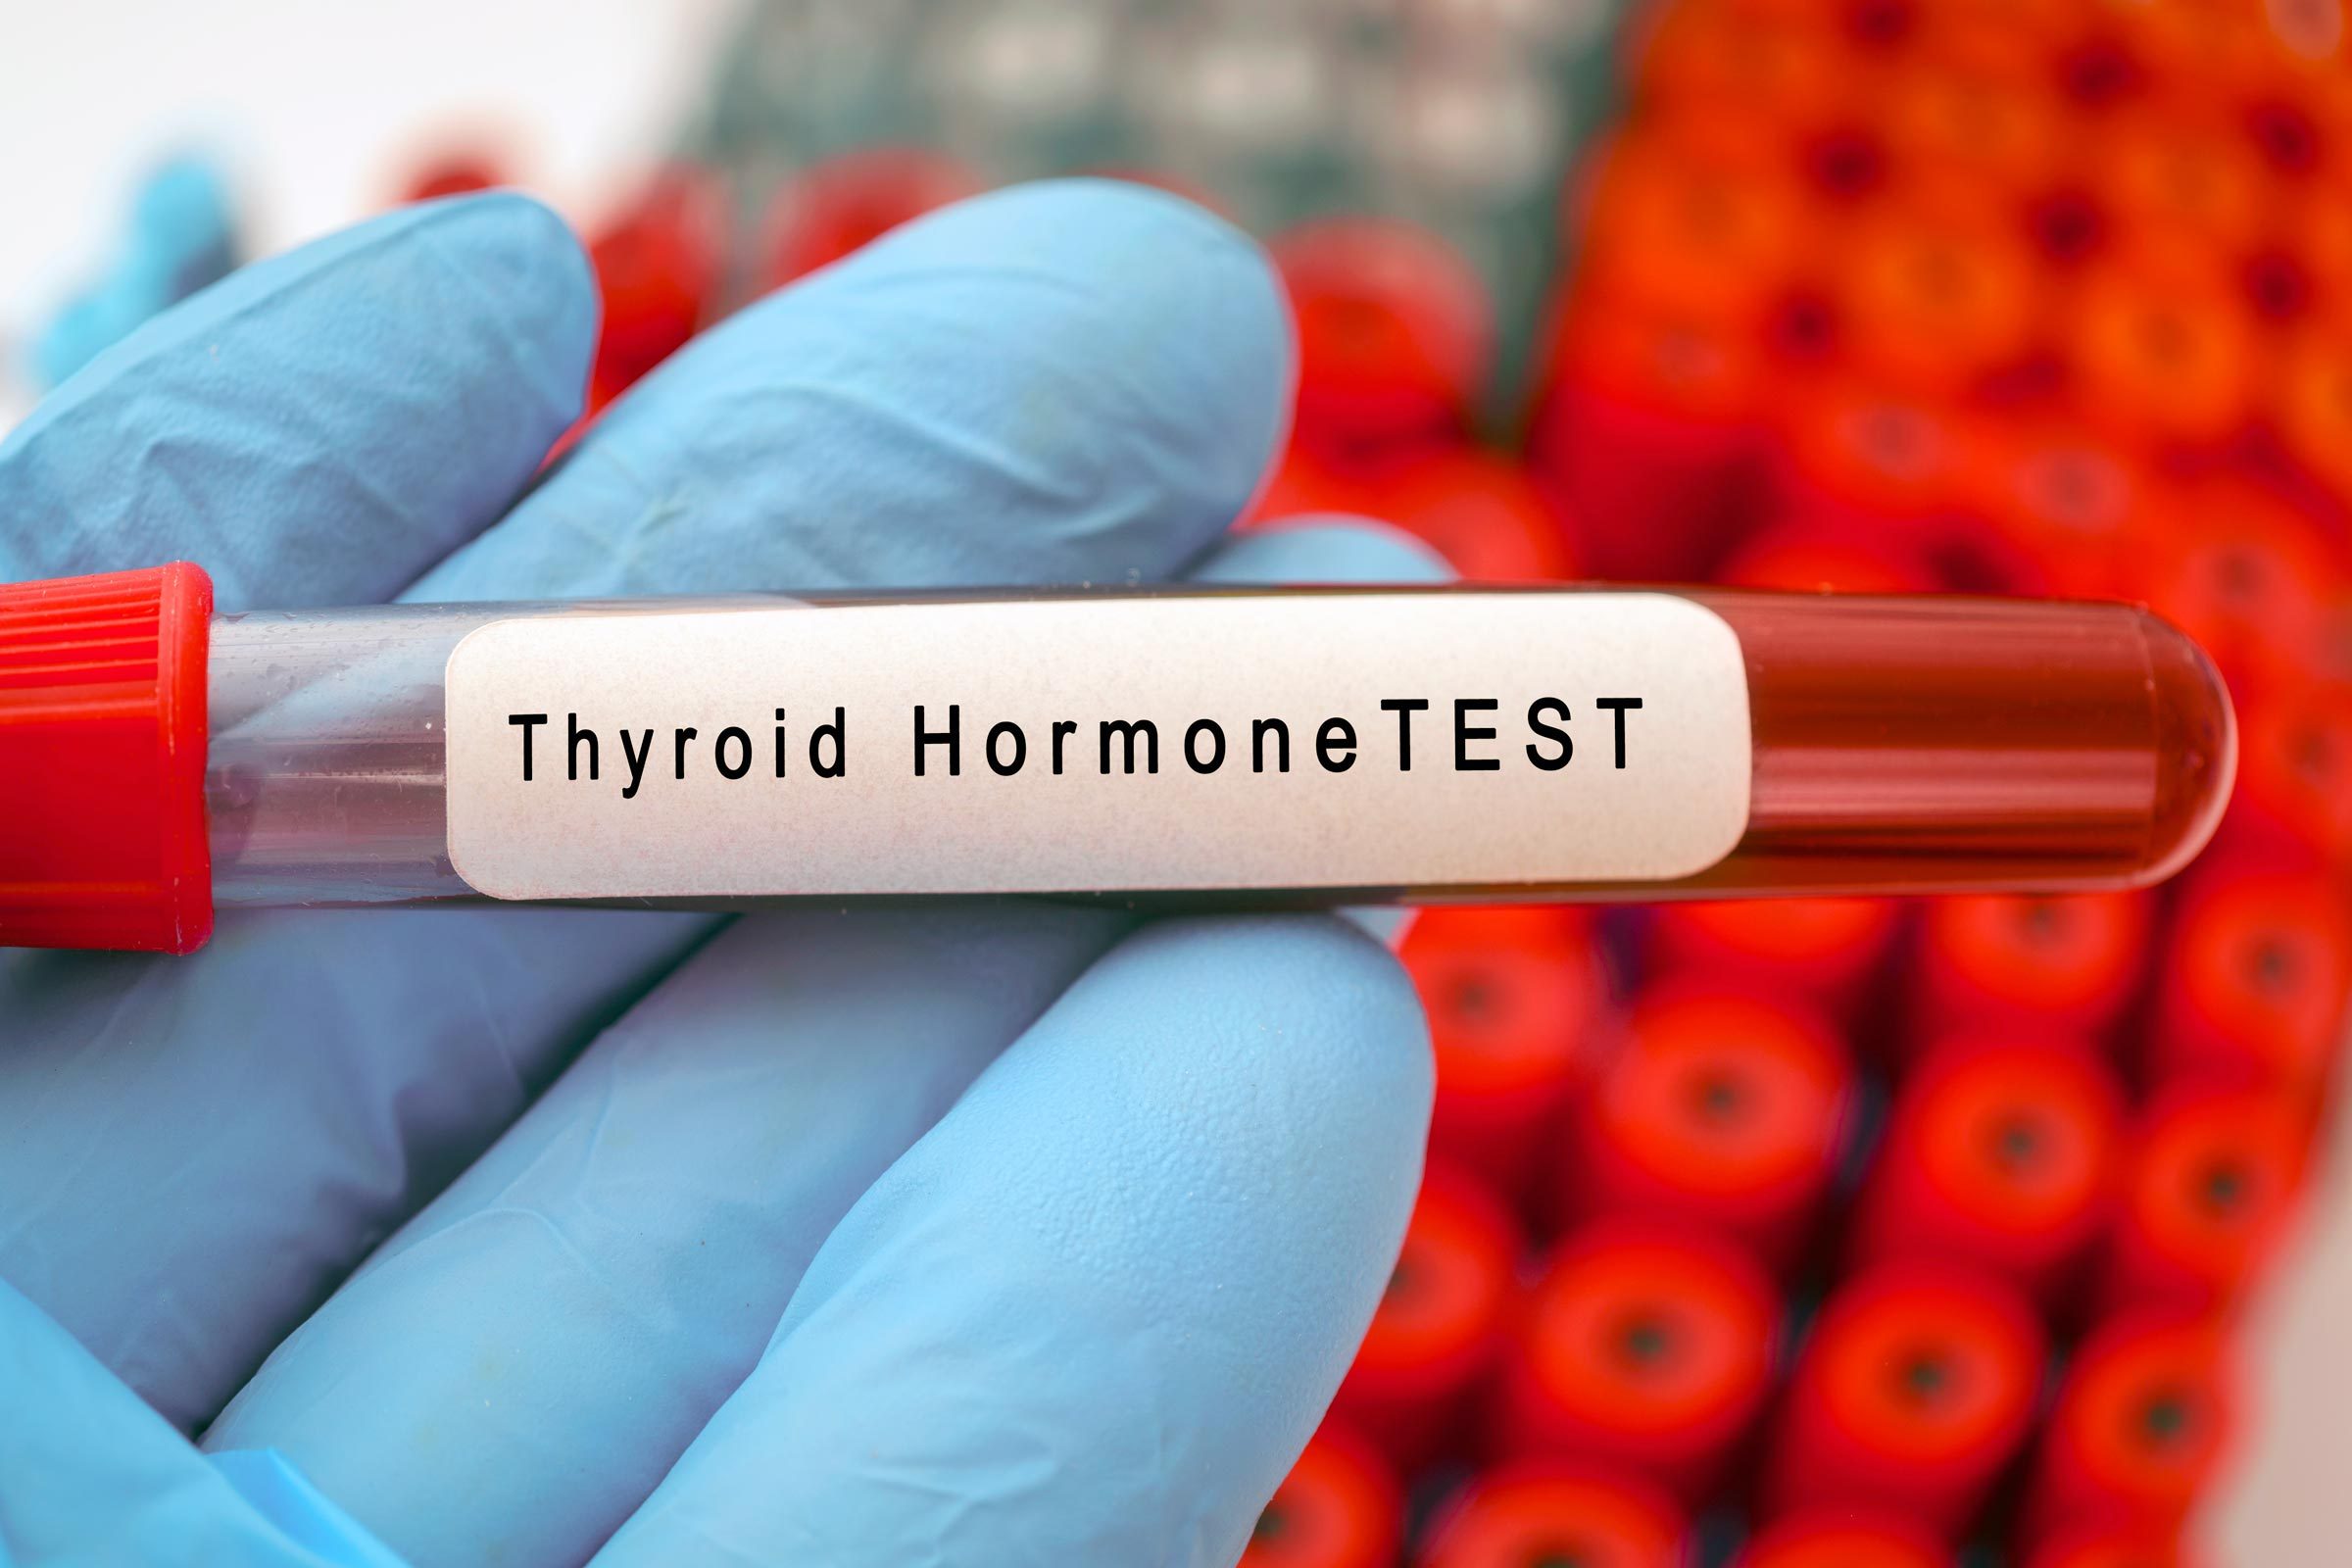 Do You Have an Under-active Thyroid? This 90-Second Quiz Helps You Find Out